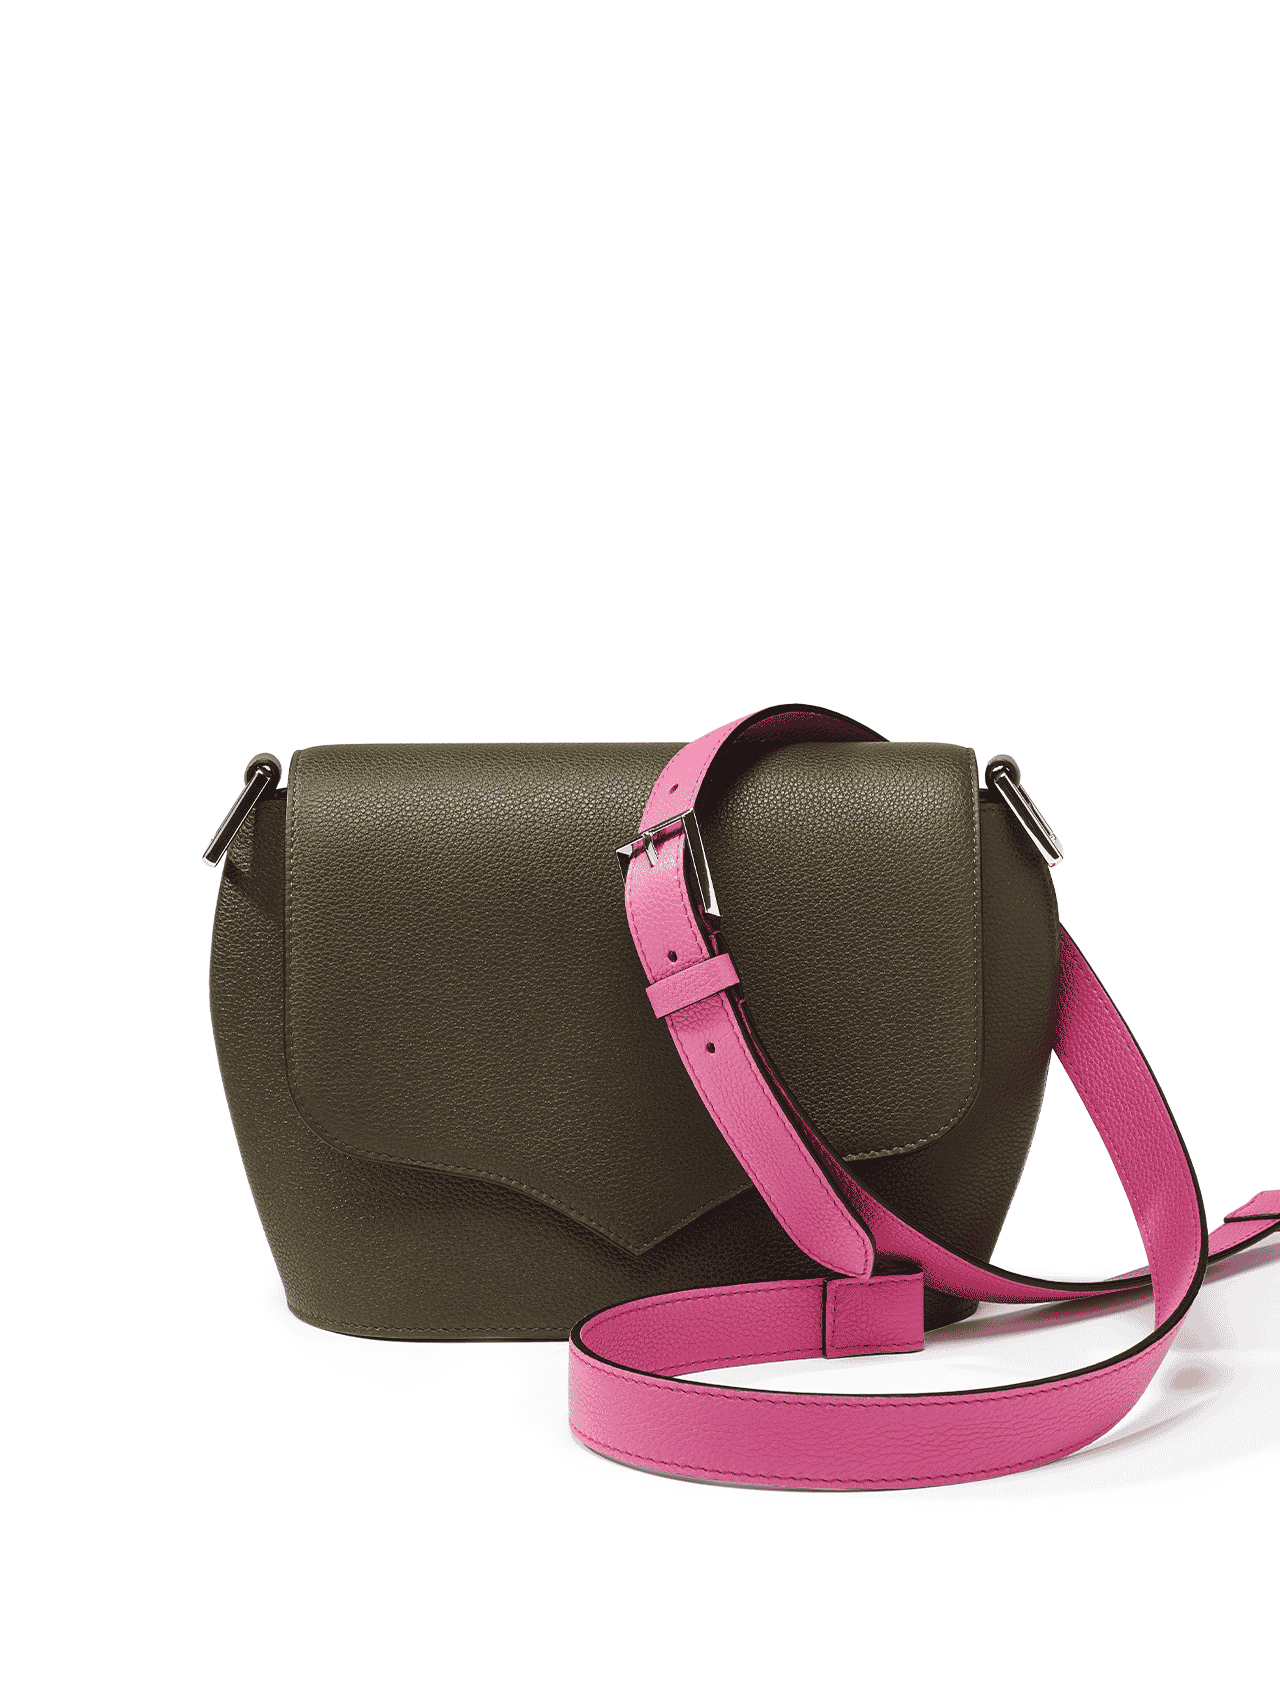 bag leather jean rousseau green pink